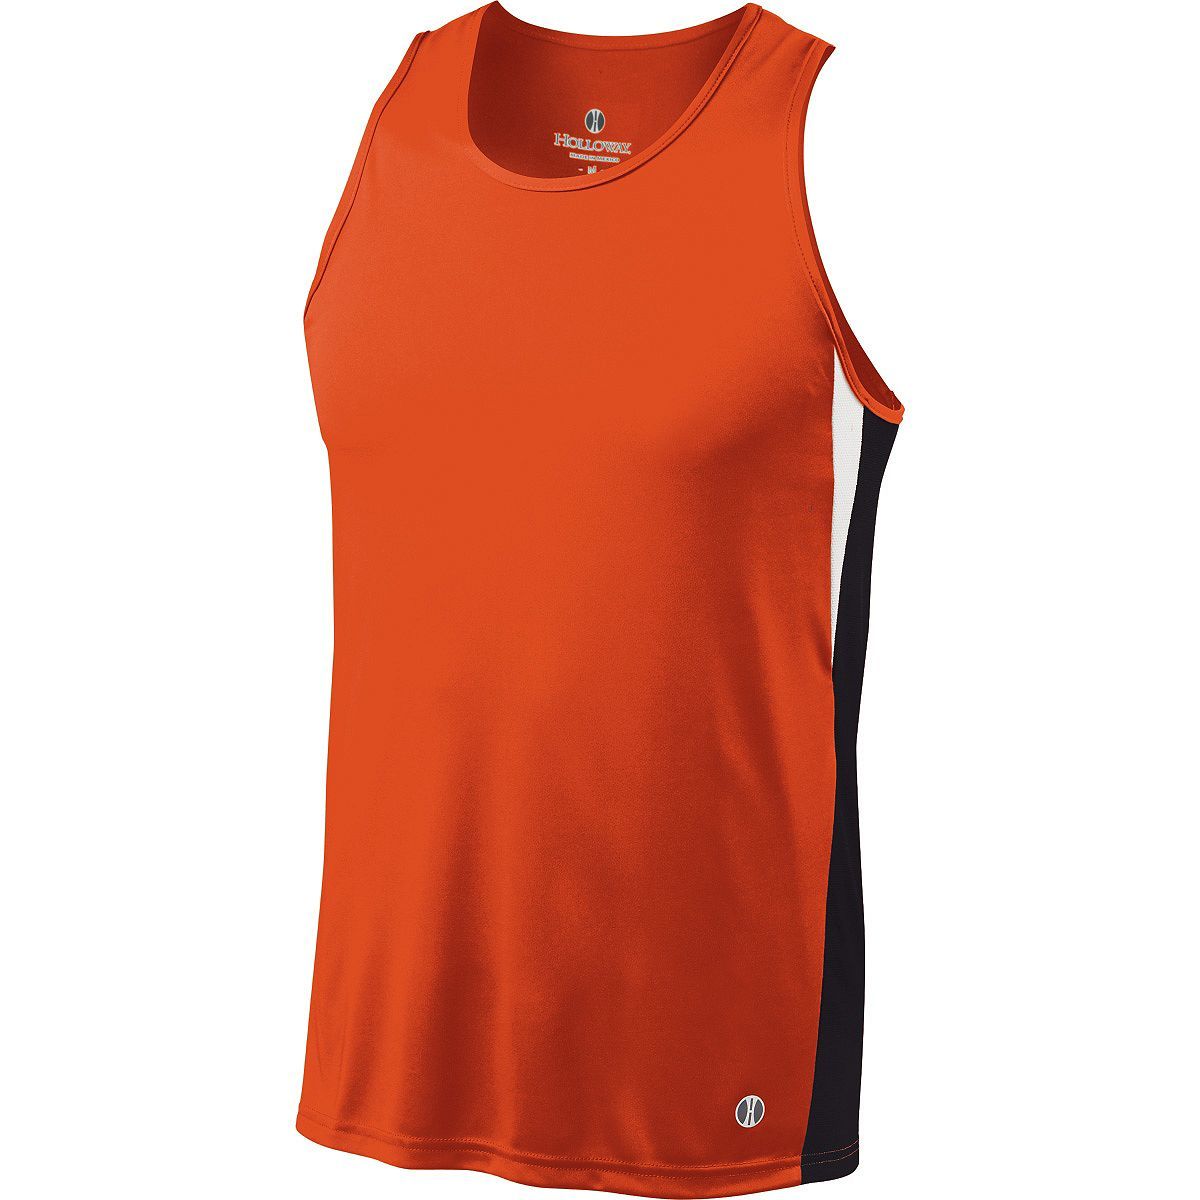 Holloway Vertical Singlet in Orange/Black/White  -Part of the Adult, Track-Field, Holloway, Shirts product lines at KanaleyCreations.com